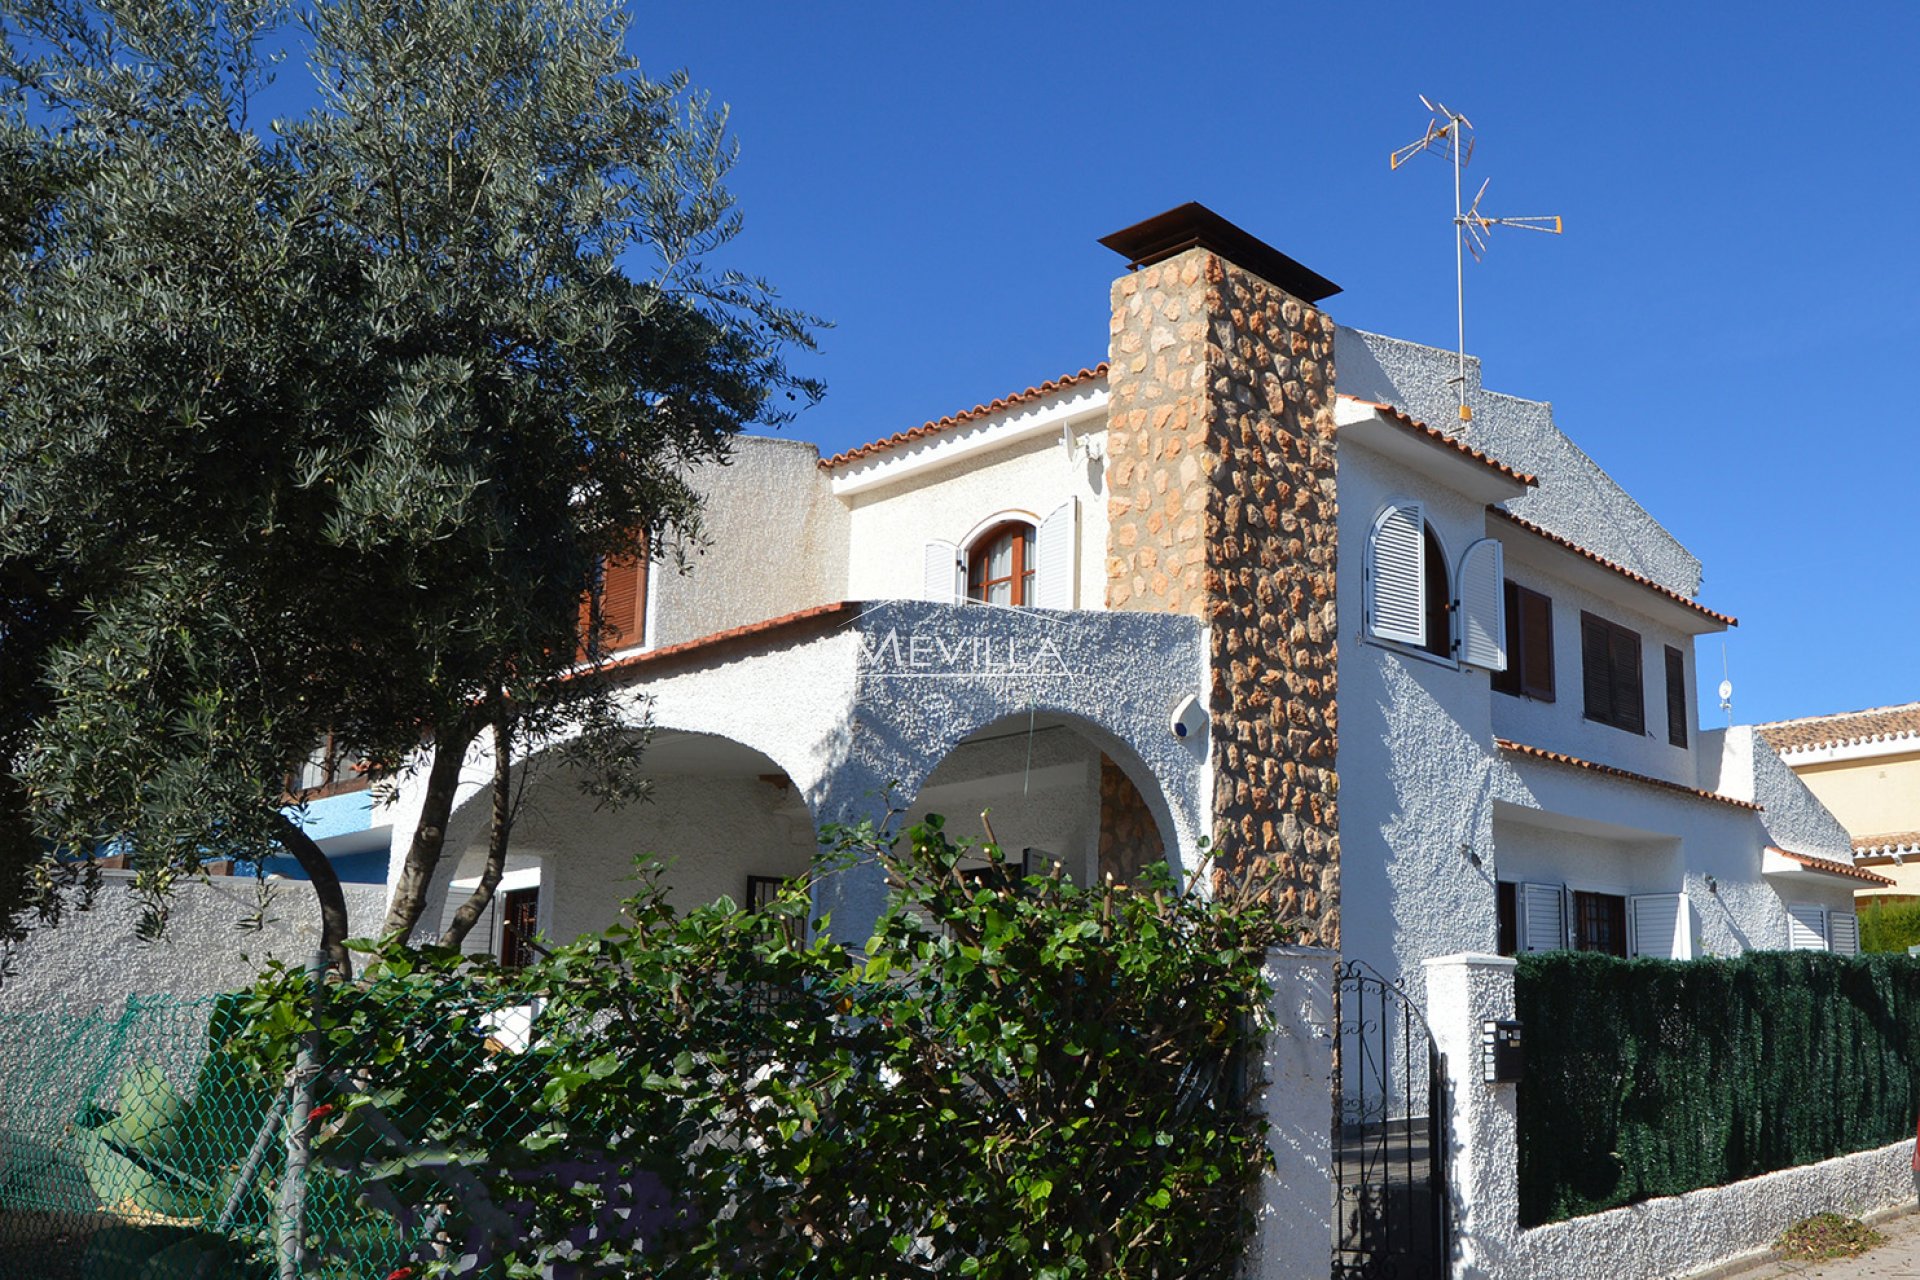 The house in Campoamor for sale